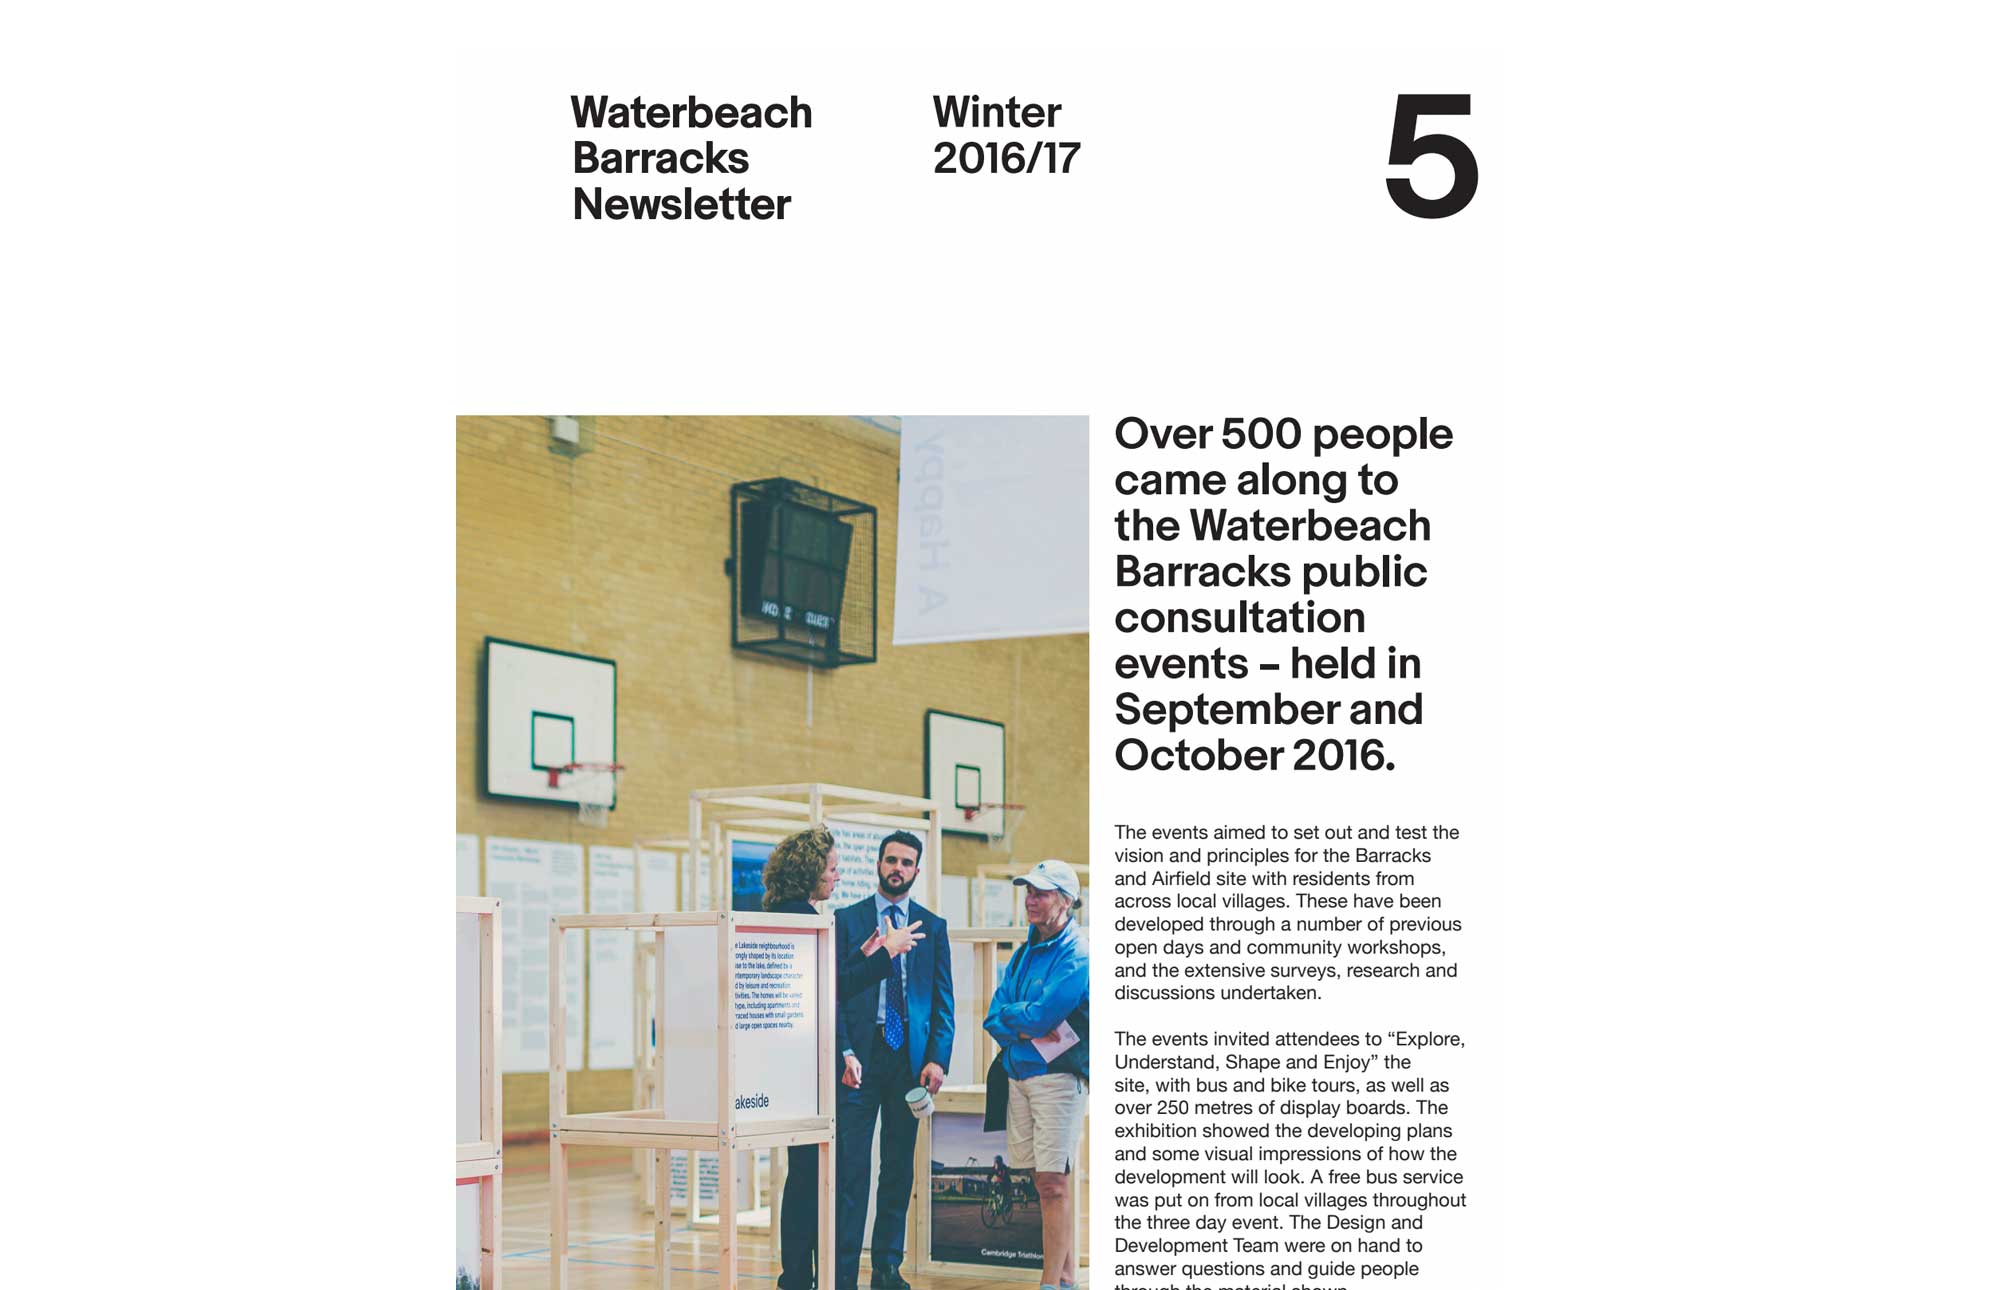 Featured image for “Waterbeach Barracks Newsletter Winter 2016/17”